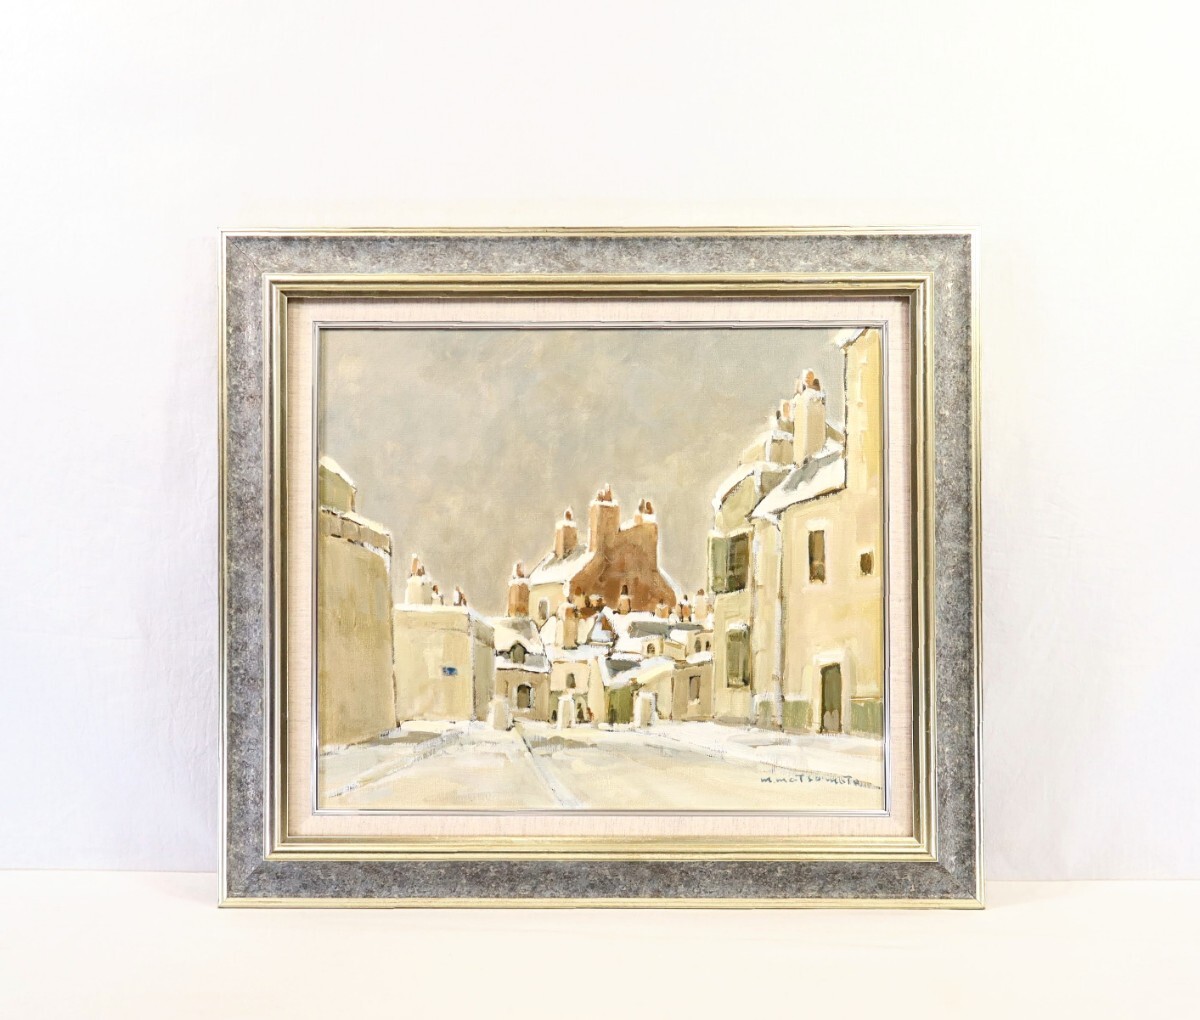 Genuine work Masato Matsumoto Oil painting Snowy Day (At Blois) Size F10 Born in Fukuoka Prefecture Member of Kofukai Active in the Buddhist painting community Central part of France, All around, Snow-covered cityscape 8727, painting, oil painting, Nature, Landscape painting